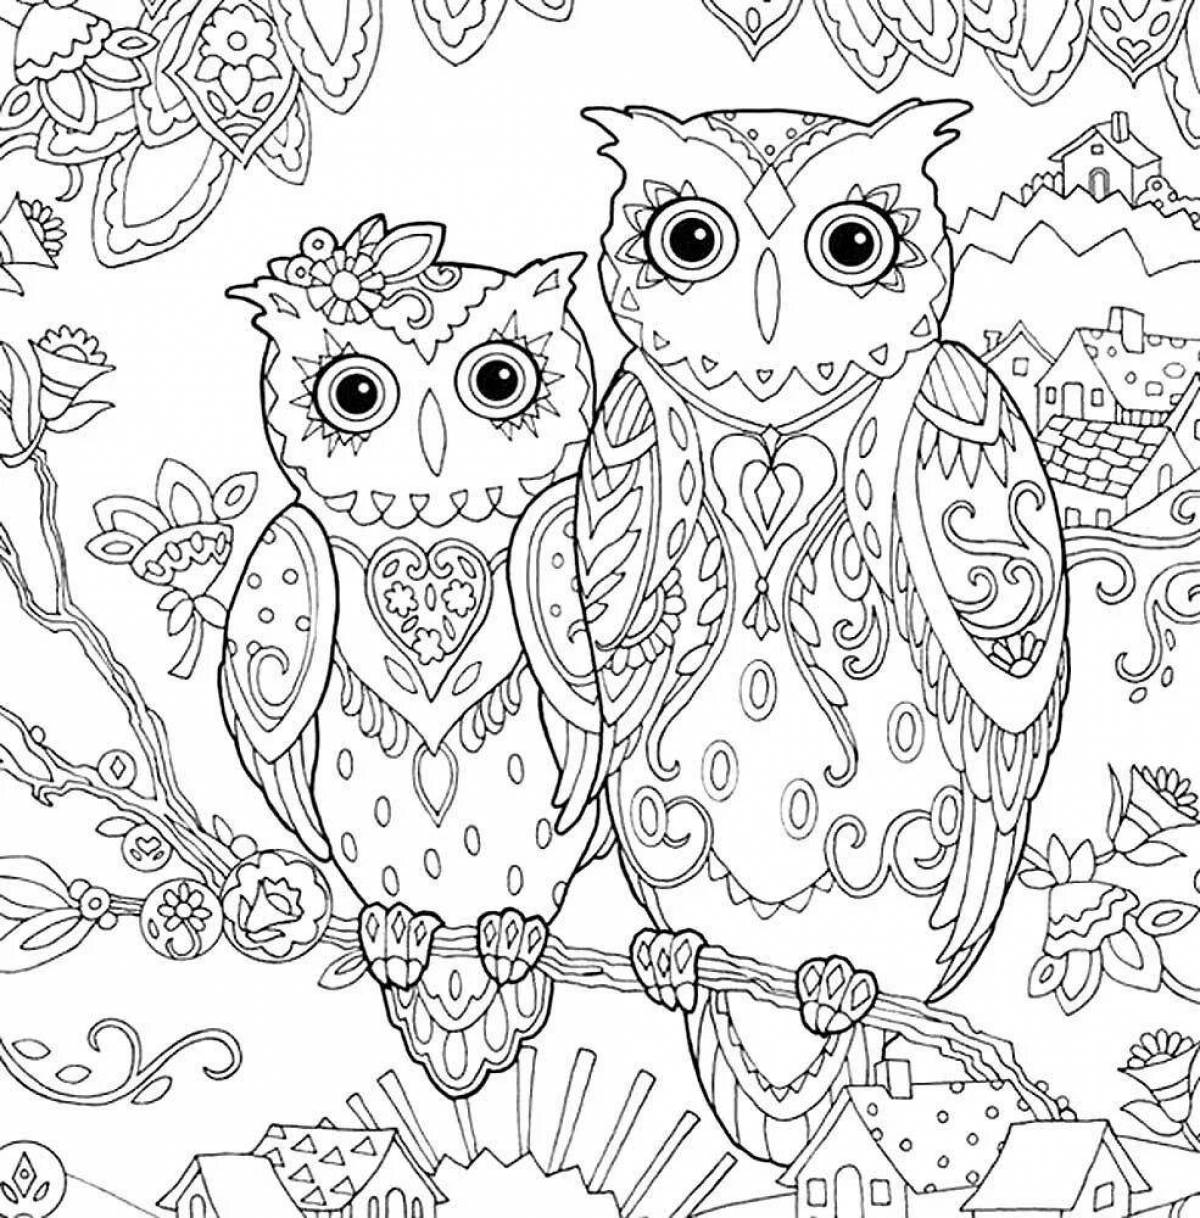 Design a detailed coloring book